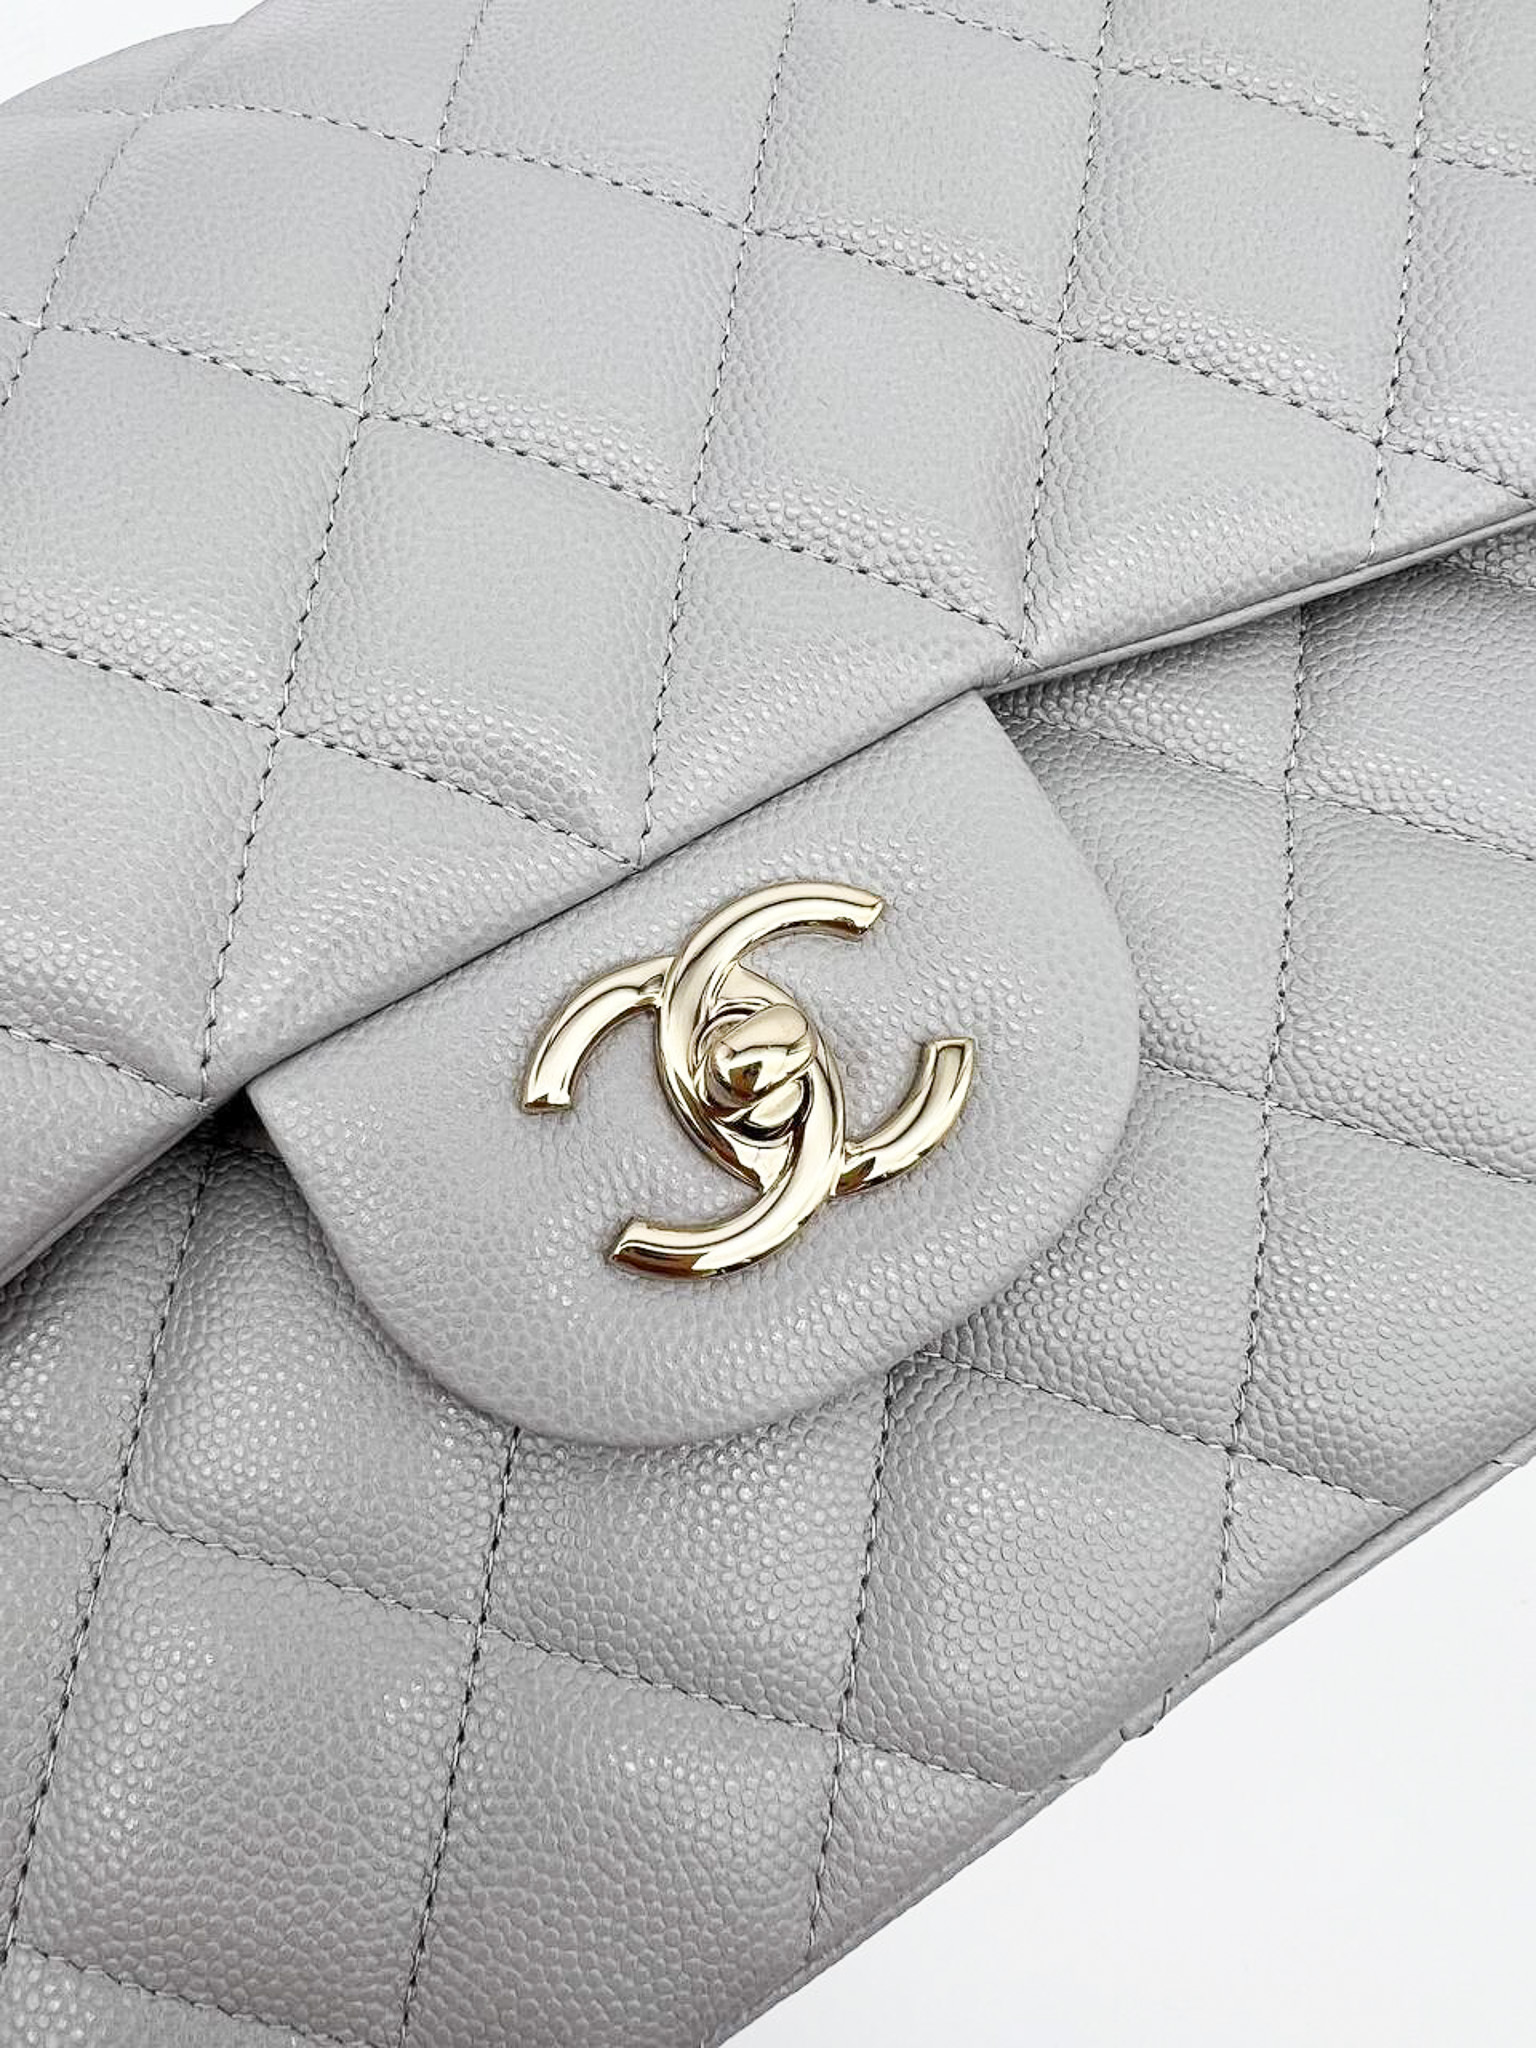 Chanel Classic Jumbo Double Flap, 21A Grey Caviar Gold Hardware, Preowned  in Box MA001